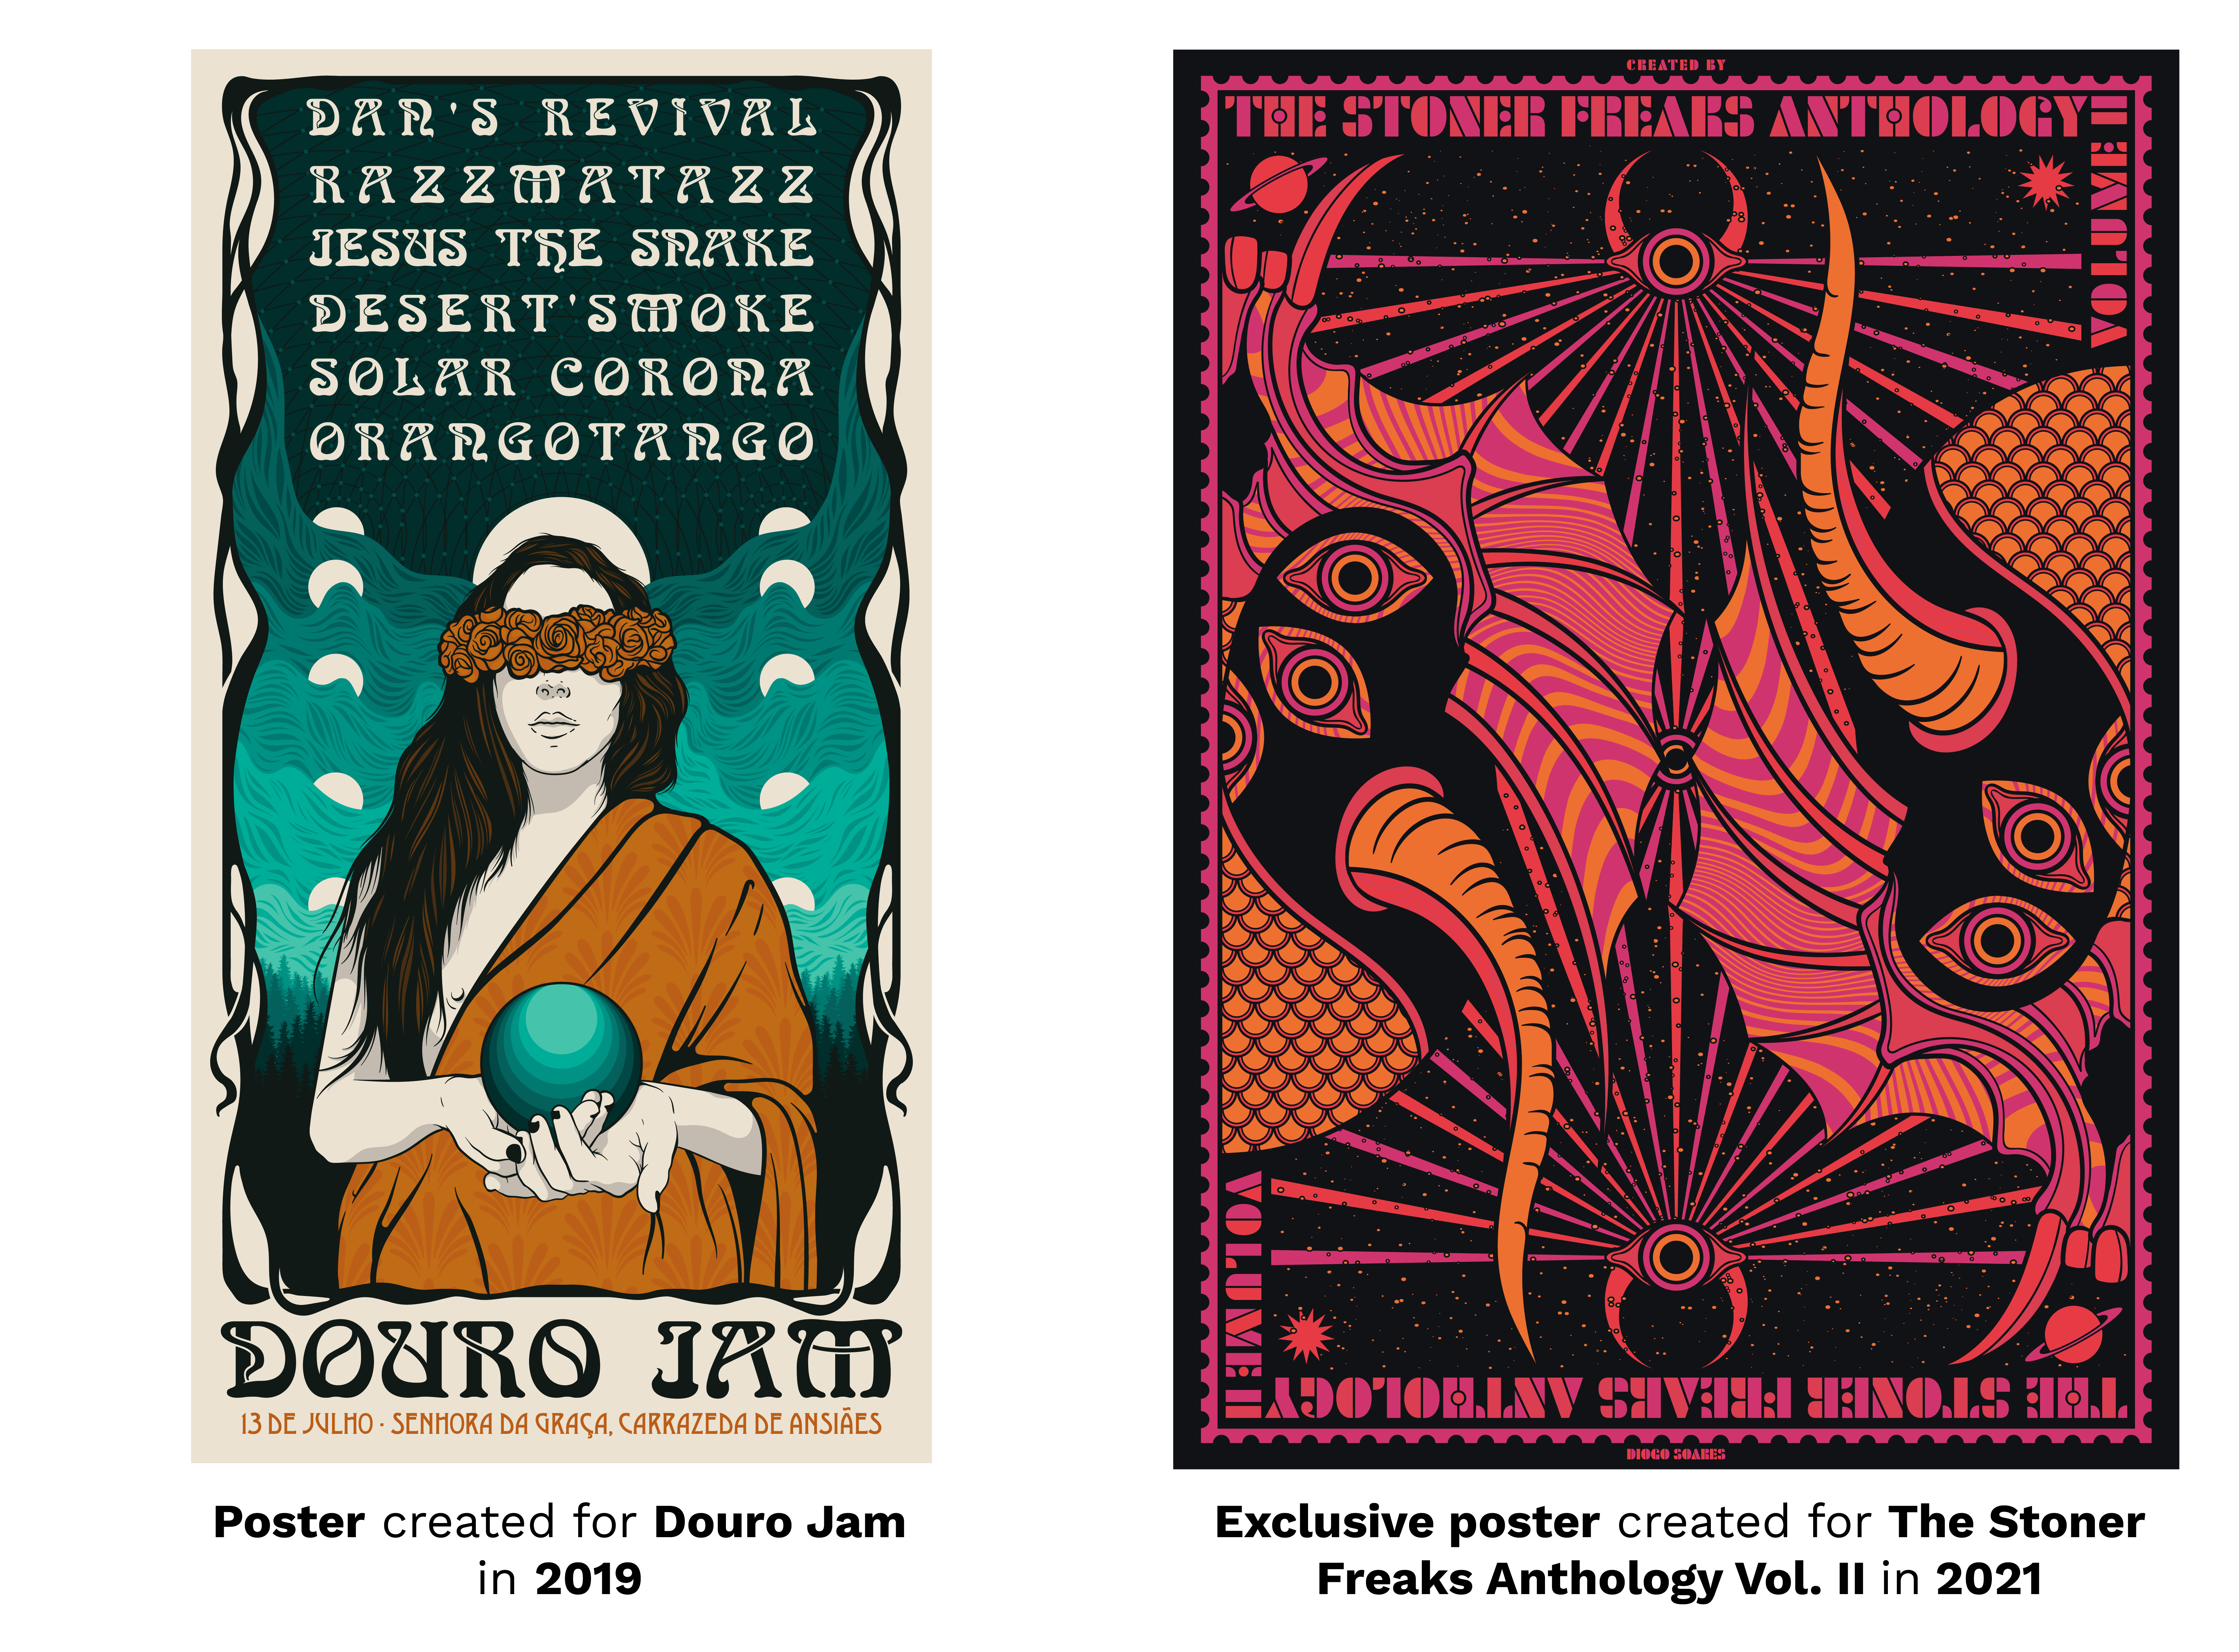 poster created for douro jam and exclusive poster created for the stoner freaks anthology vol.2